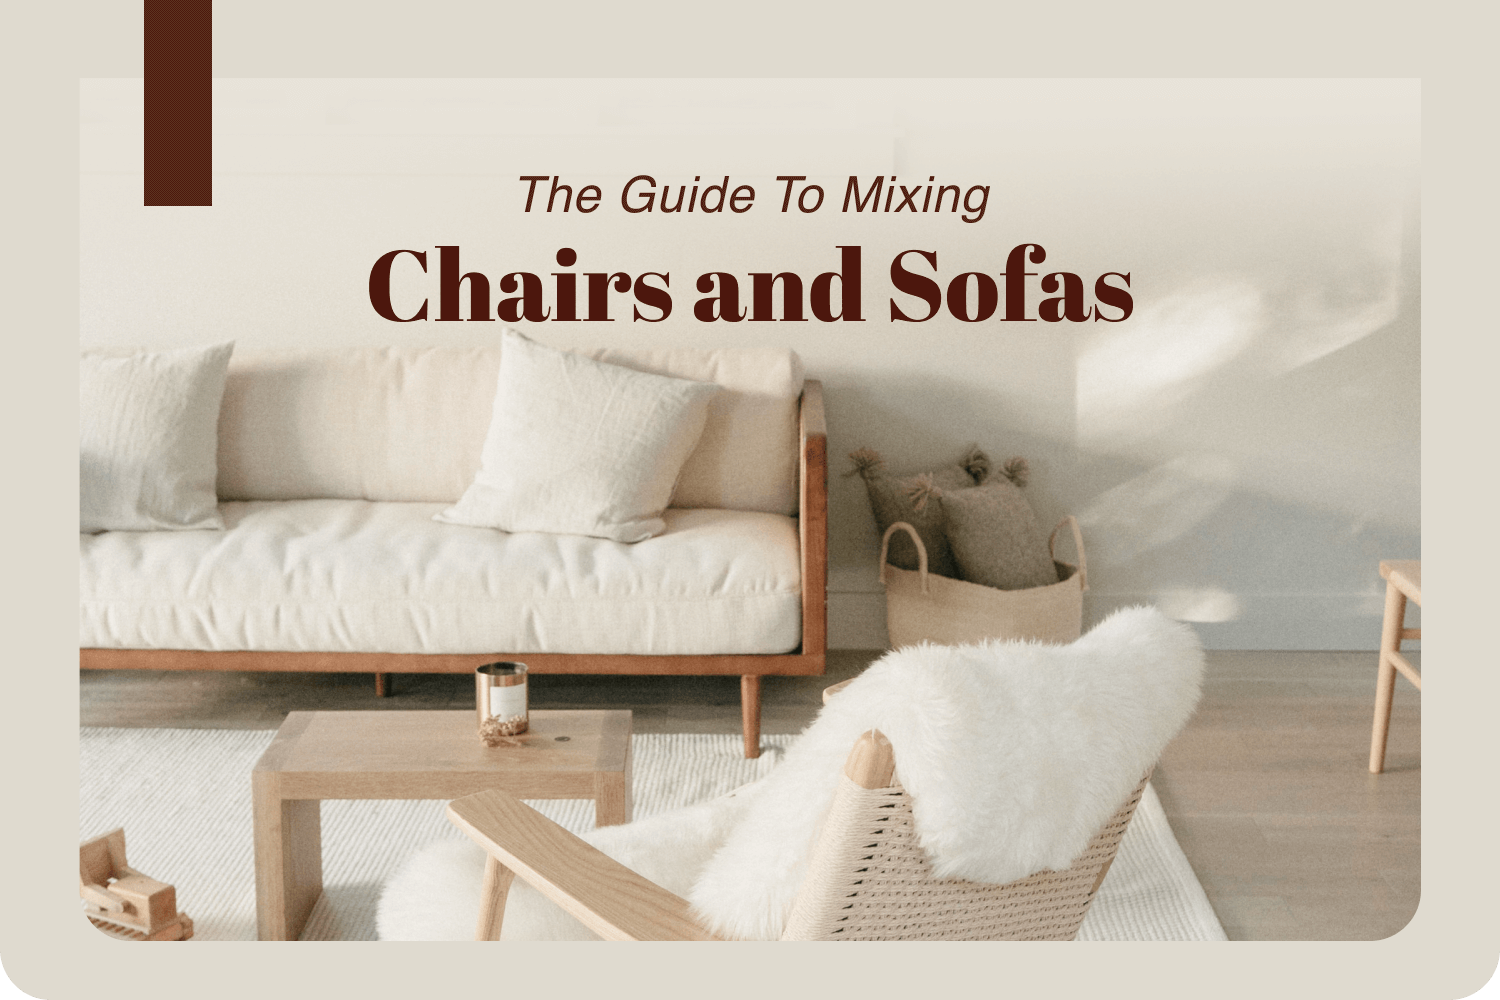 The Guide to Mixing Chairs and Sofas